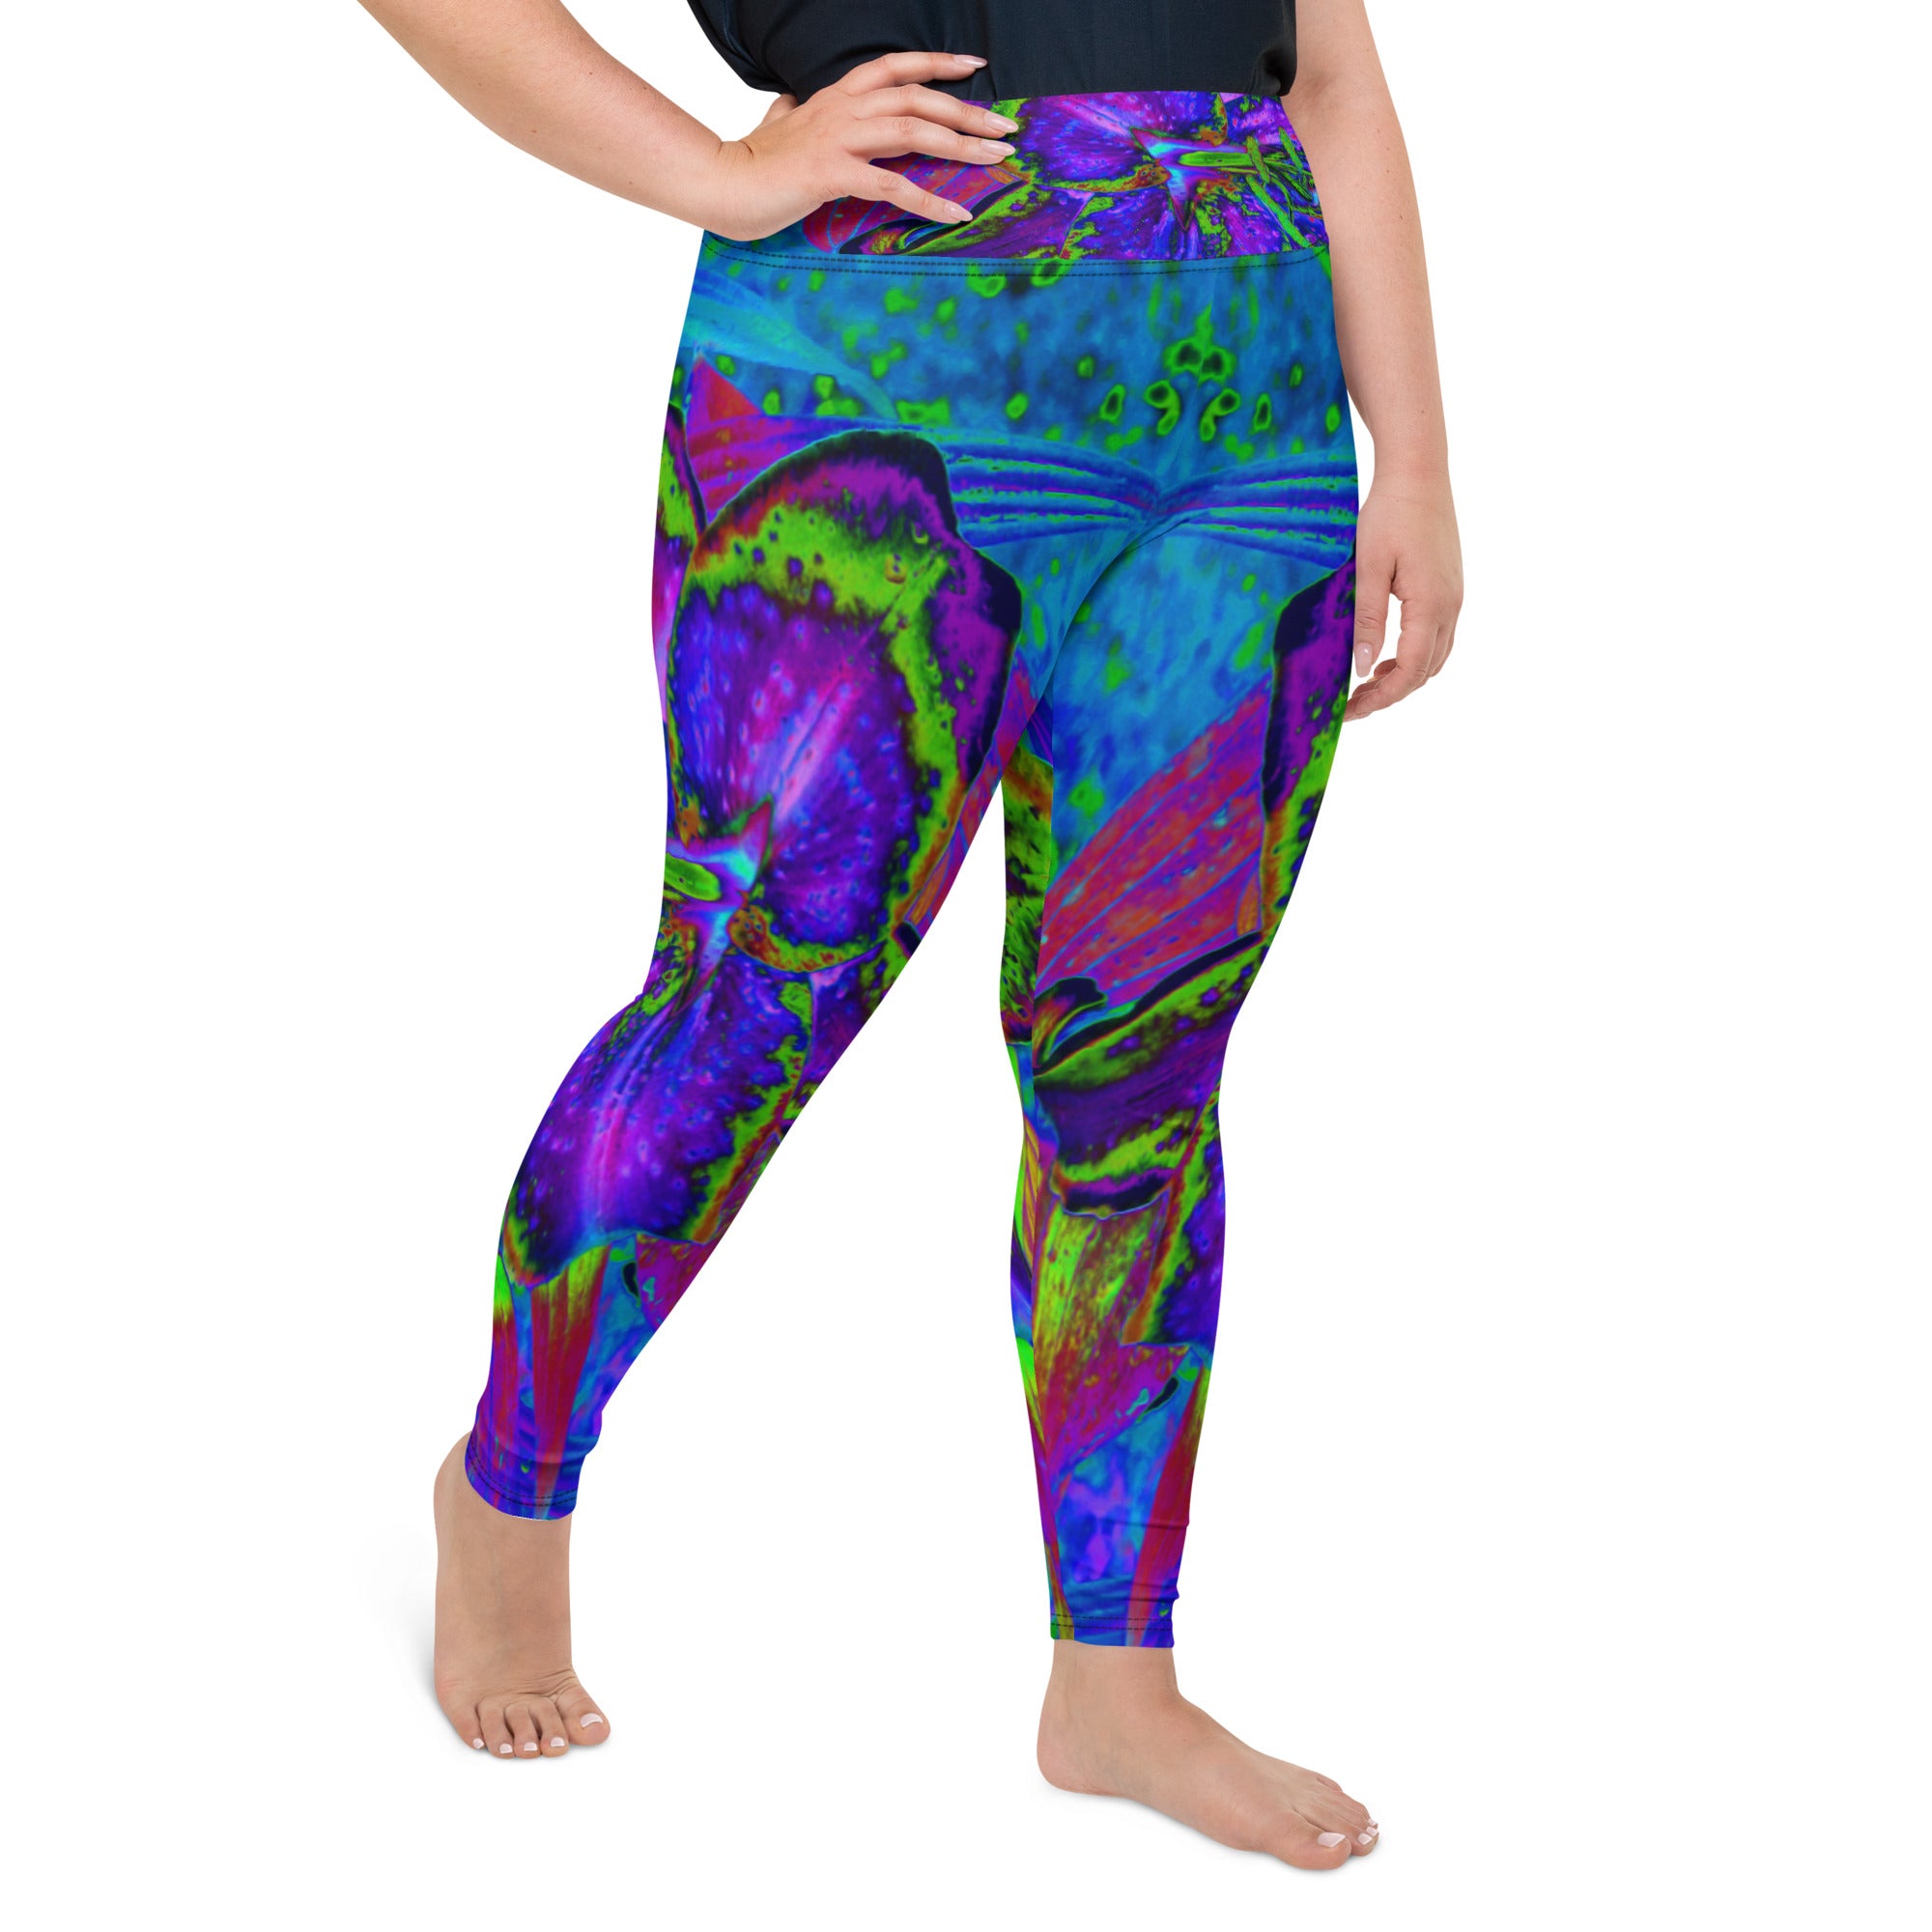 Plus Size Leggings for Women, Psychedelic Purple and Lime Green Lily Flower